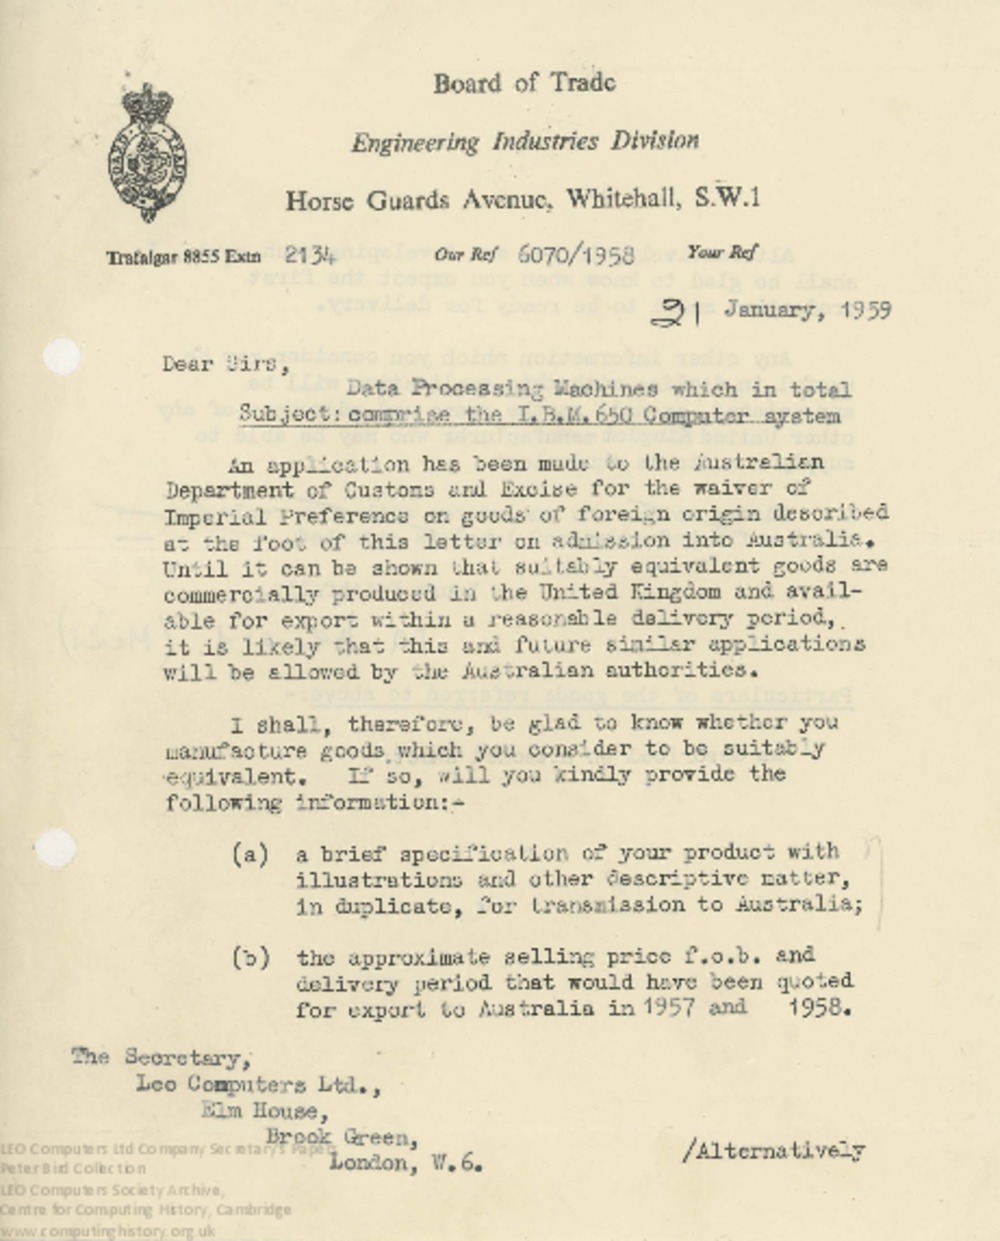 Article: 62460  Correspondence with the Board of Trade concerning waiving of 'Imperial Preference' for IBM equipment imported into Australia, Jan 1959